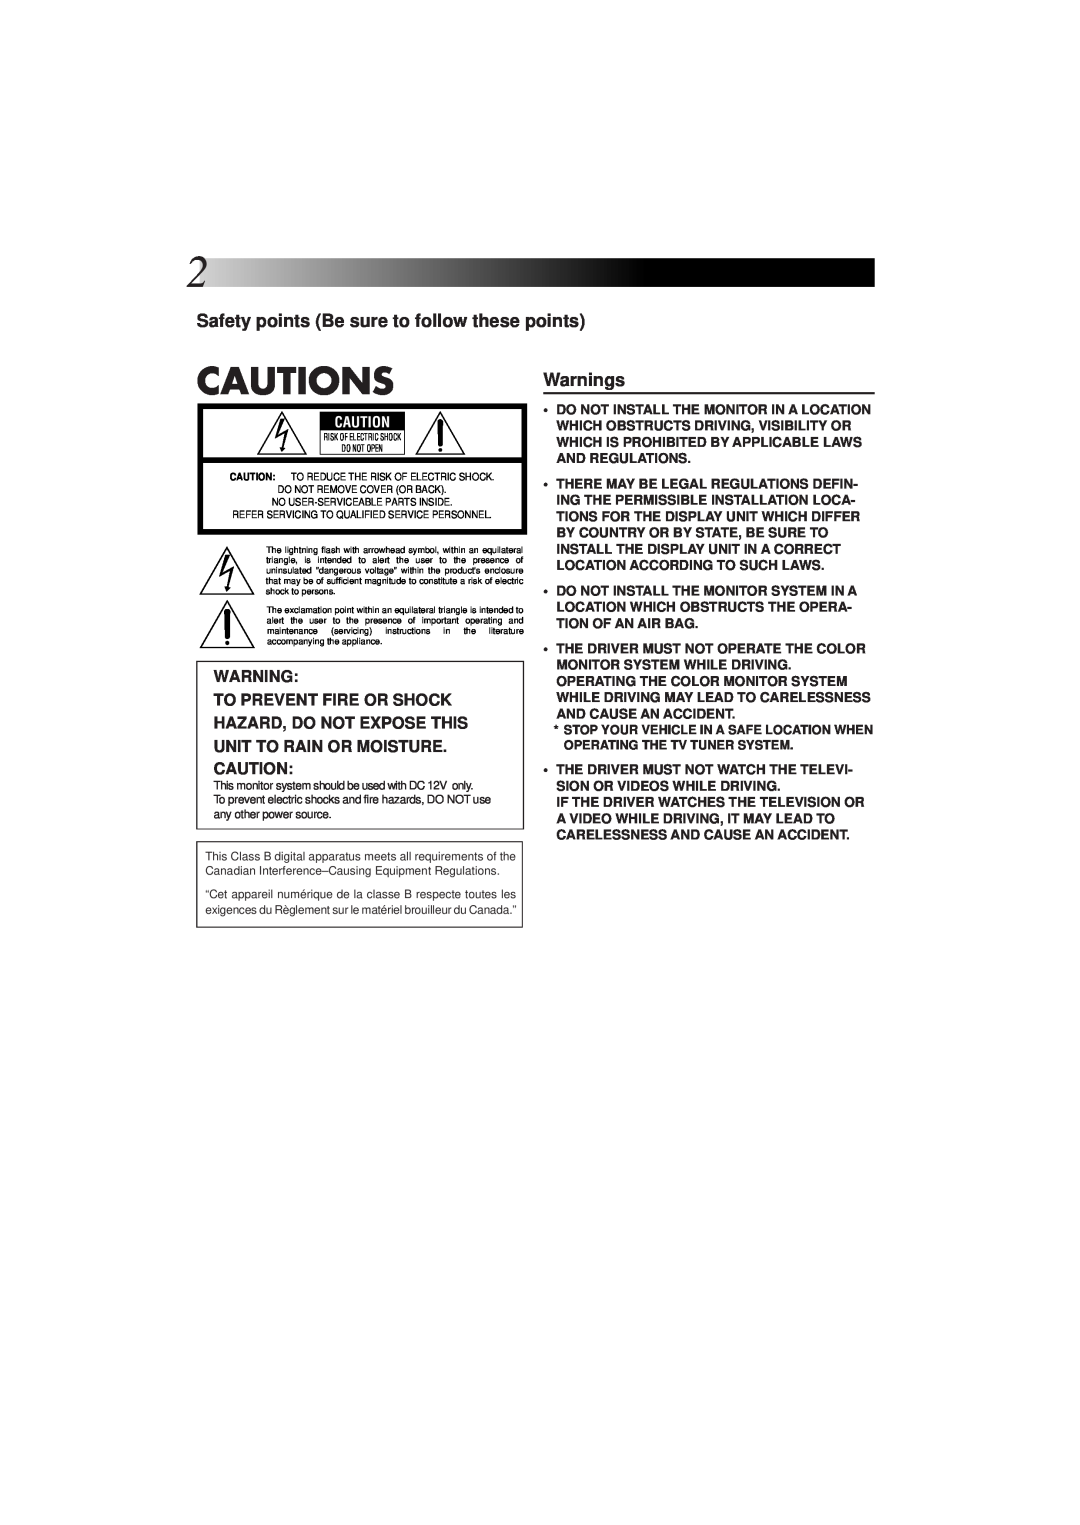 JVC KV-M65 manual Safety points Be sure to follow these points, Warnings, Cautions 